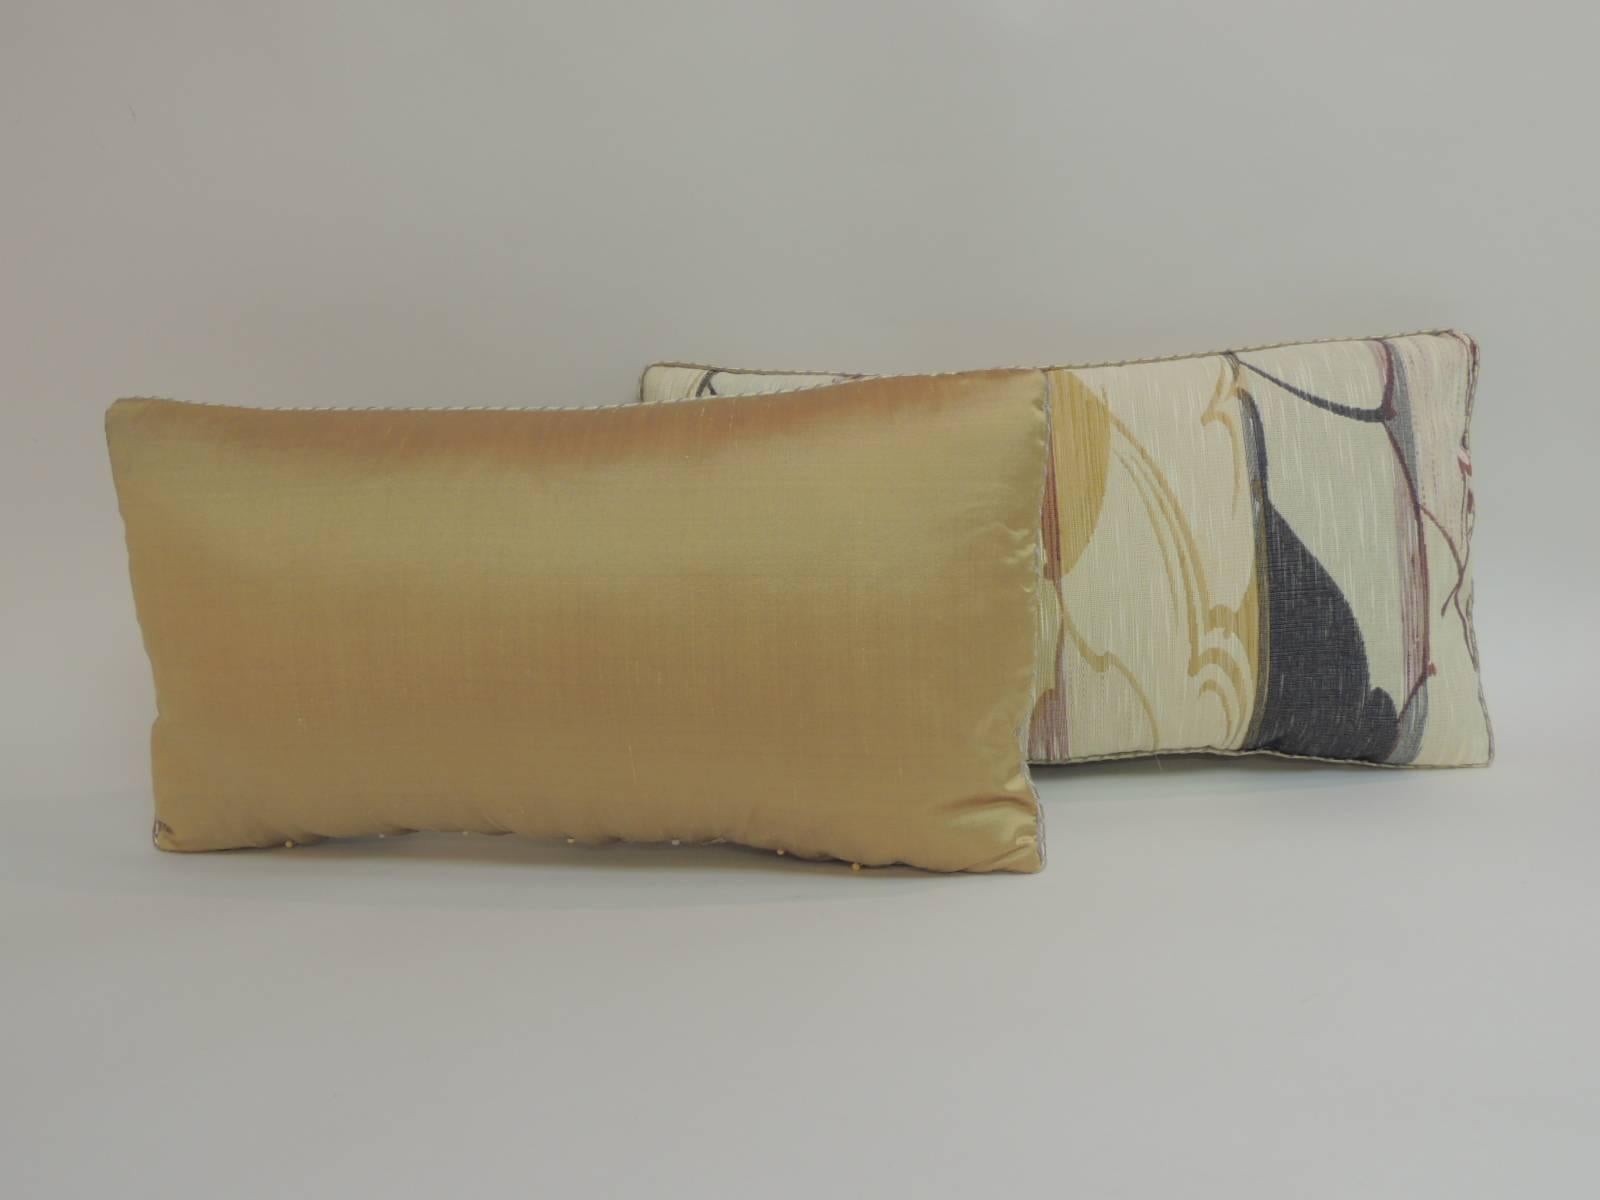 Hand-Crafted Pair of Vintage Art Deco Style Gold and Black Obi Lumbar Decorative Pillows